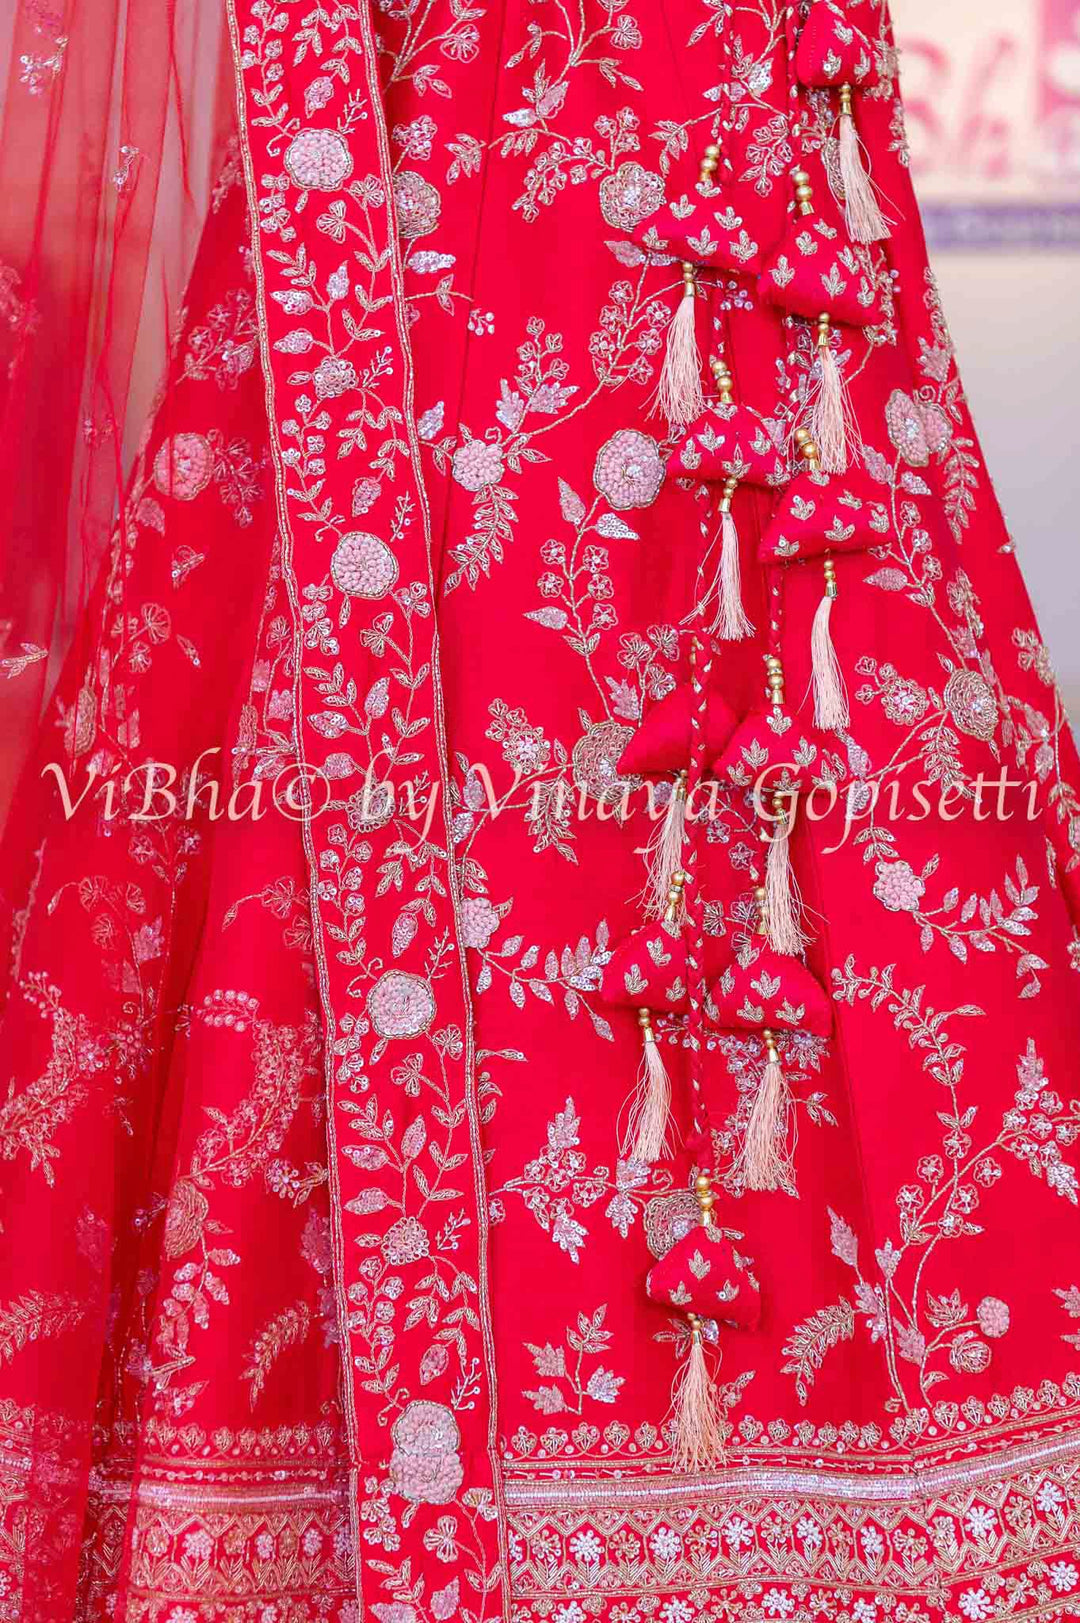 Accessories & Jewelry - Scarlet Red Raw Silk Lehenga Blouse With Heavy Resham And Zardosi Embroidery